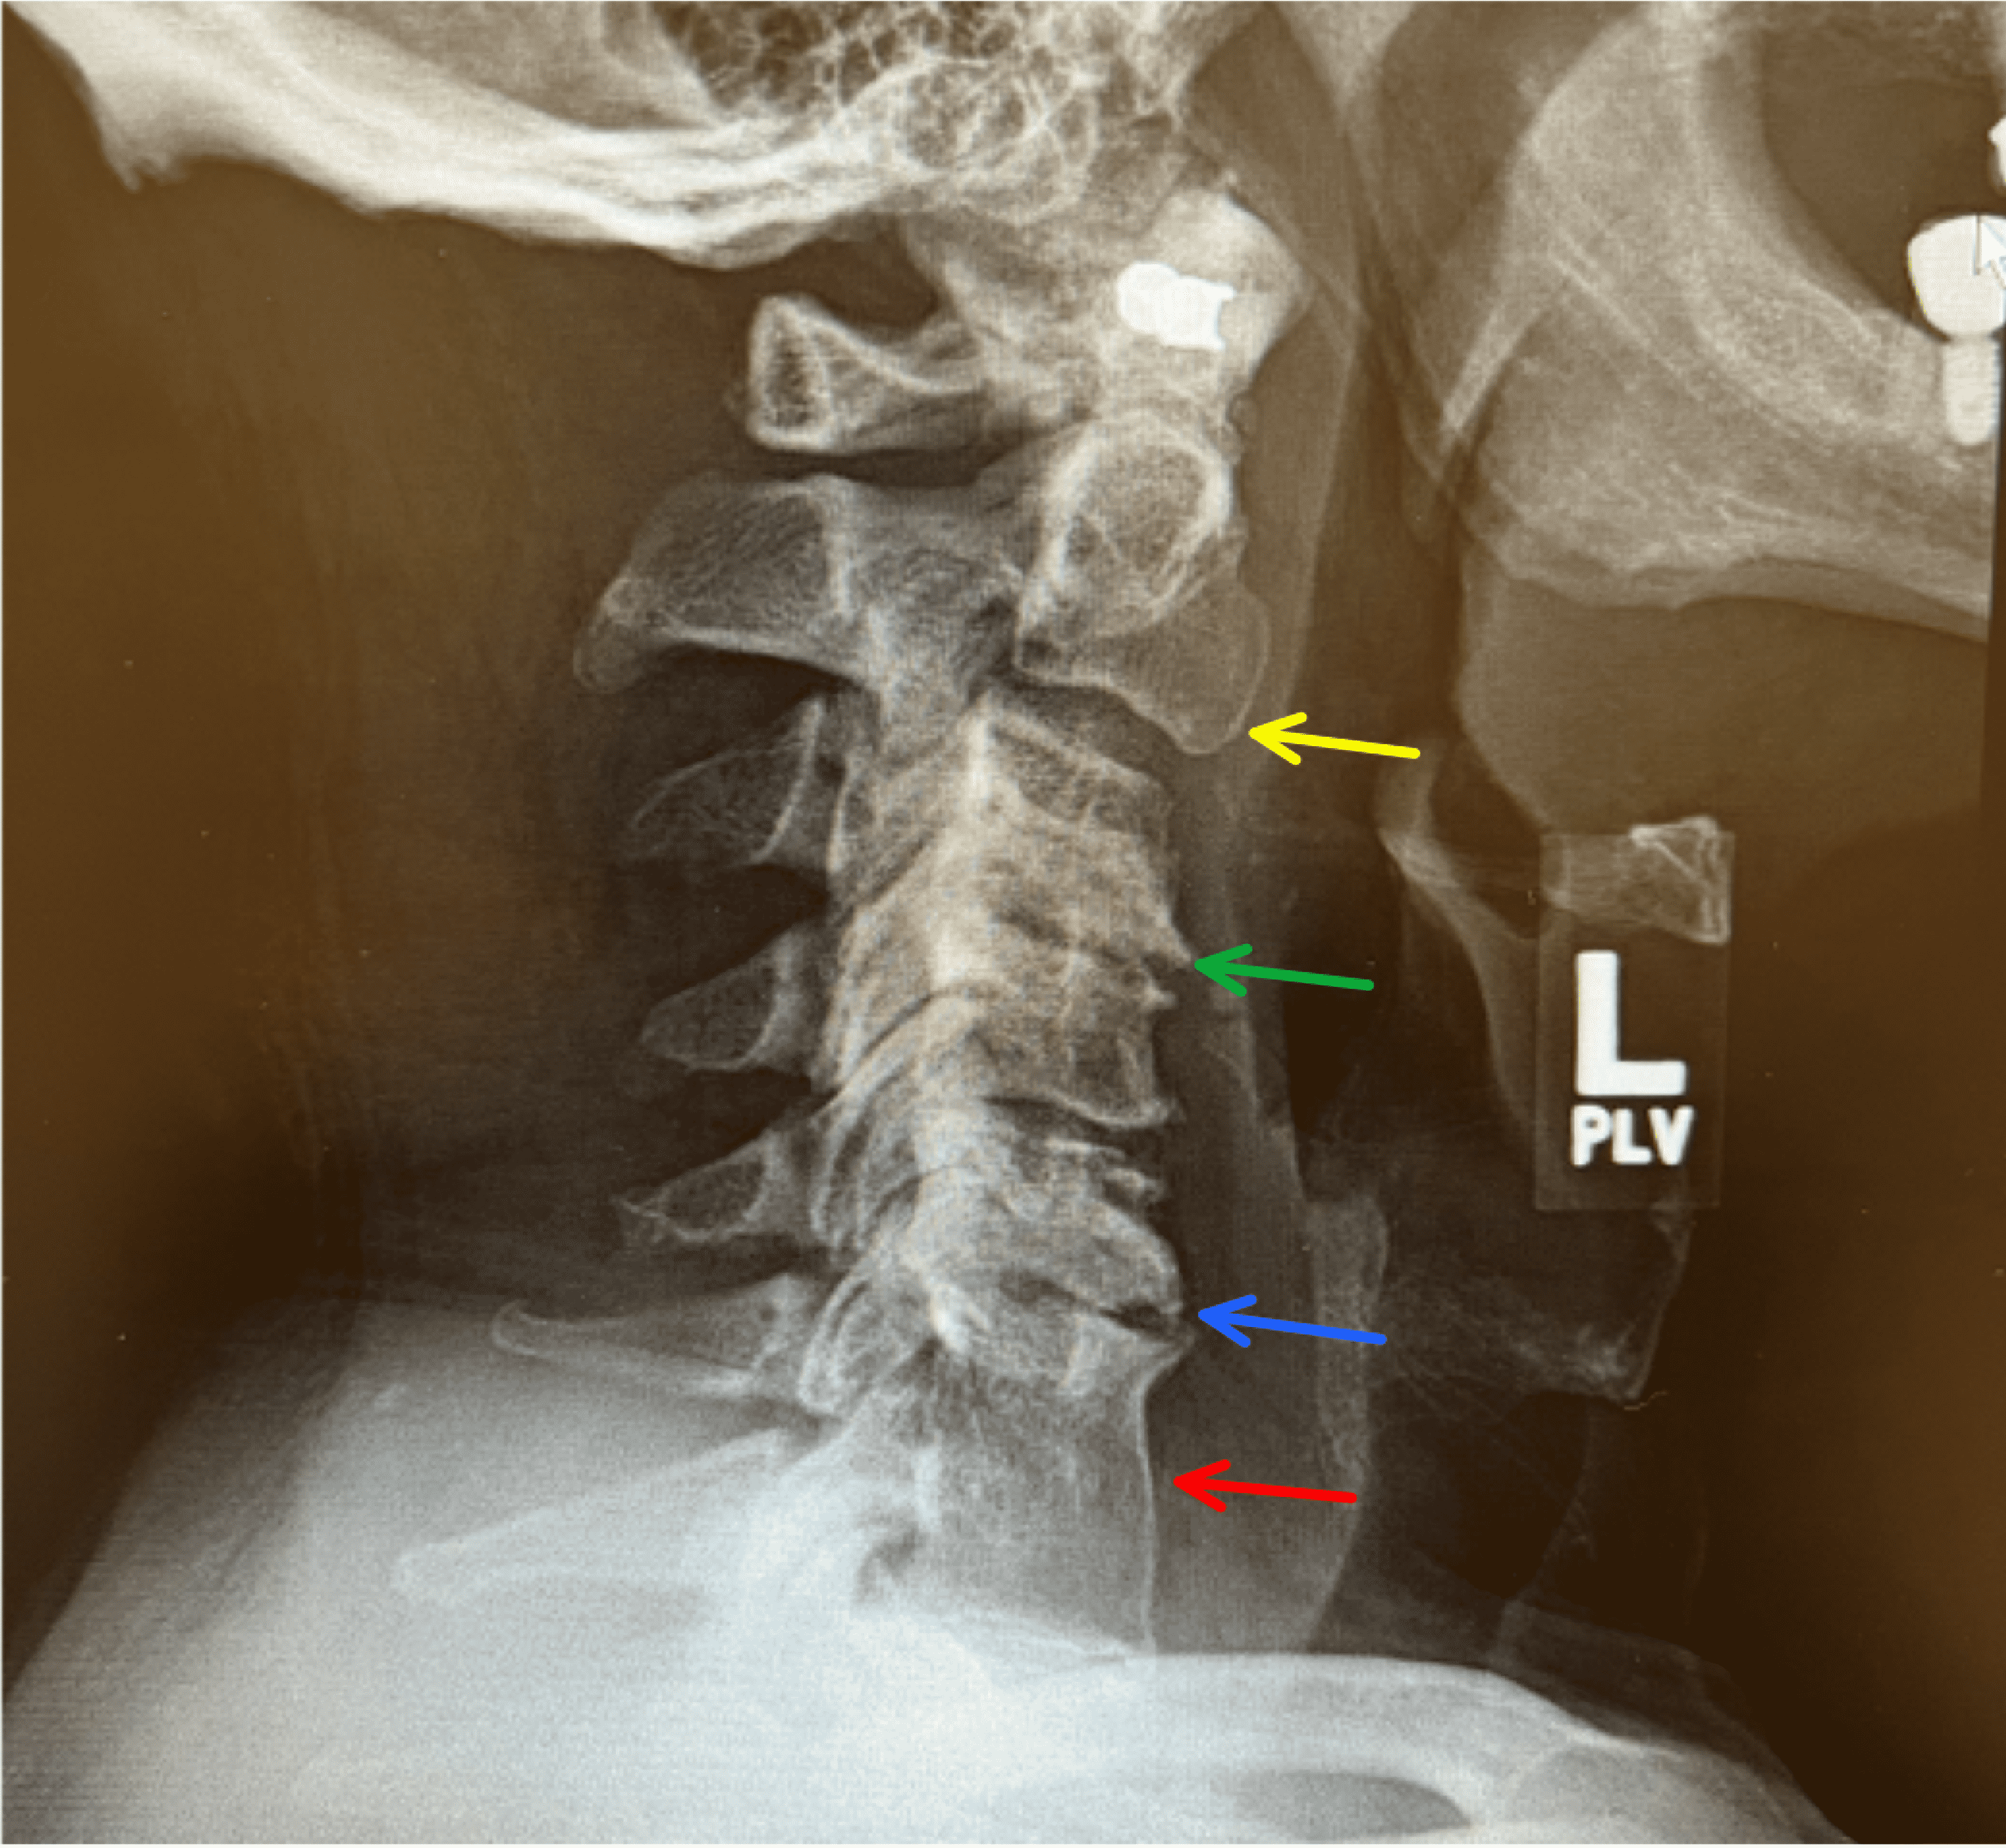 x ray of cervical spine